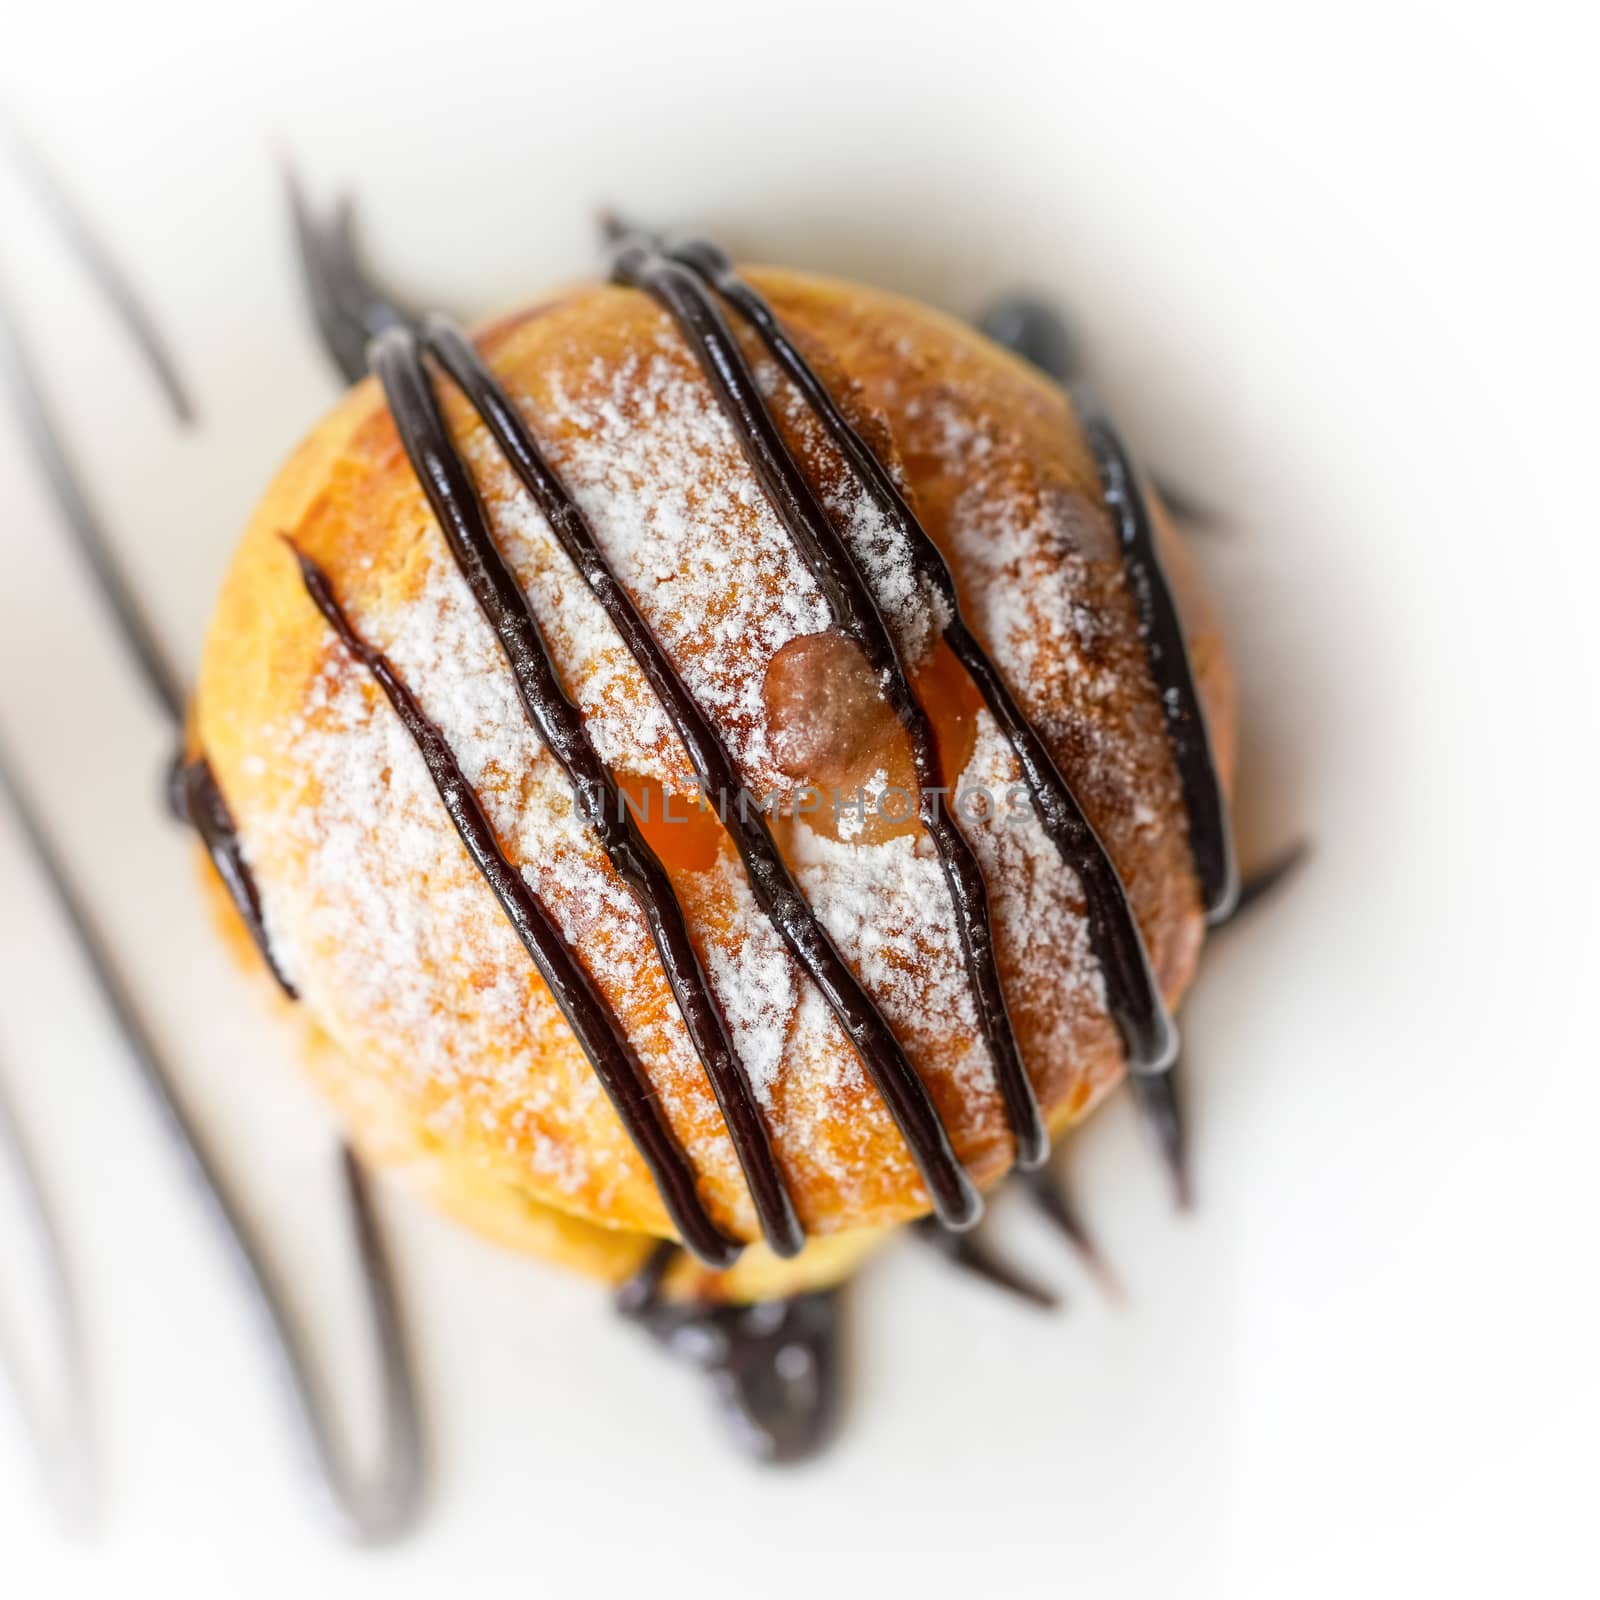 Profiterole, a filled French choux pastry ball with a typically sweet and moist filling of Vanilla Ice Cream, Salted Caramel, Chocolate Sauce